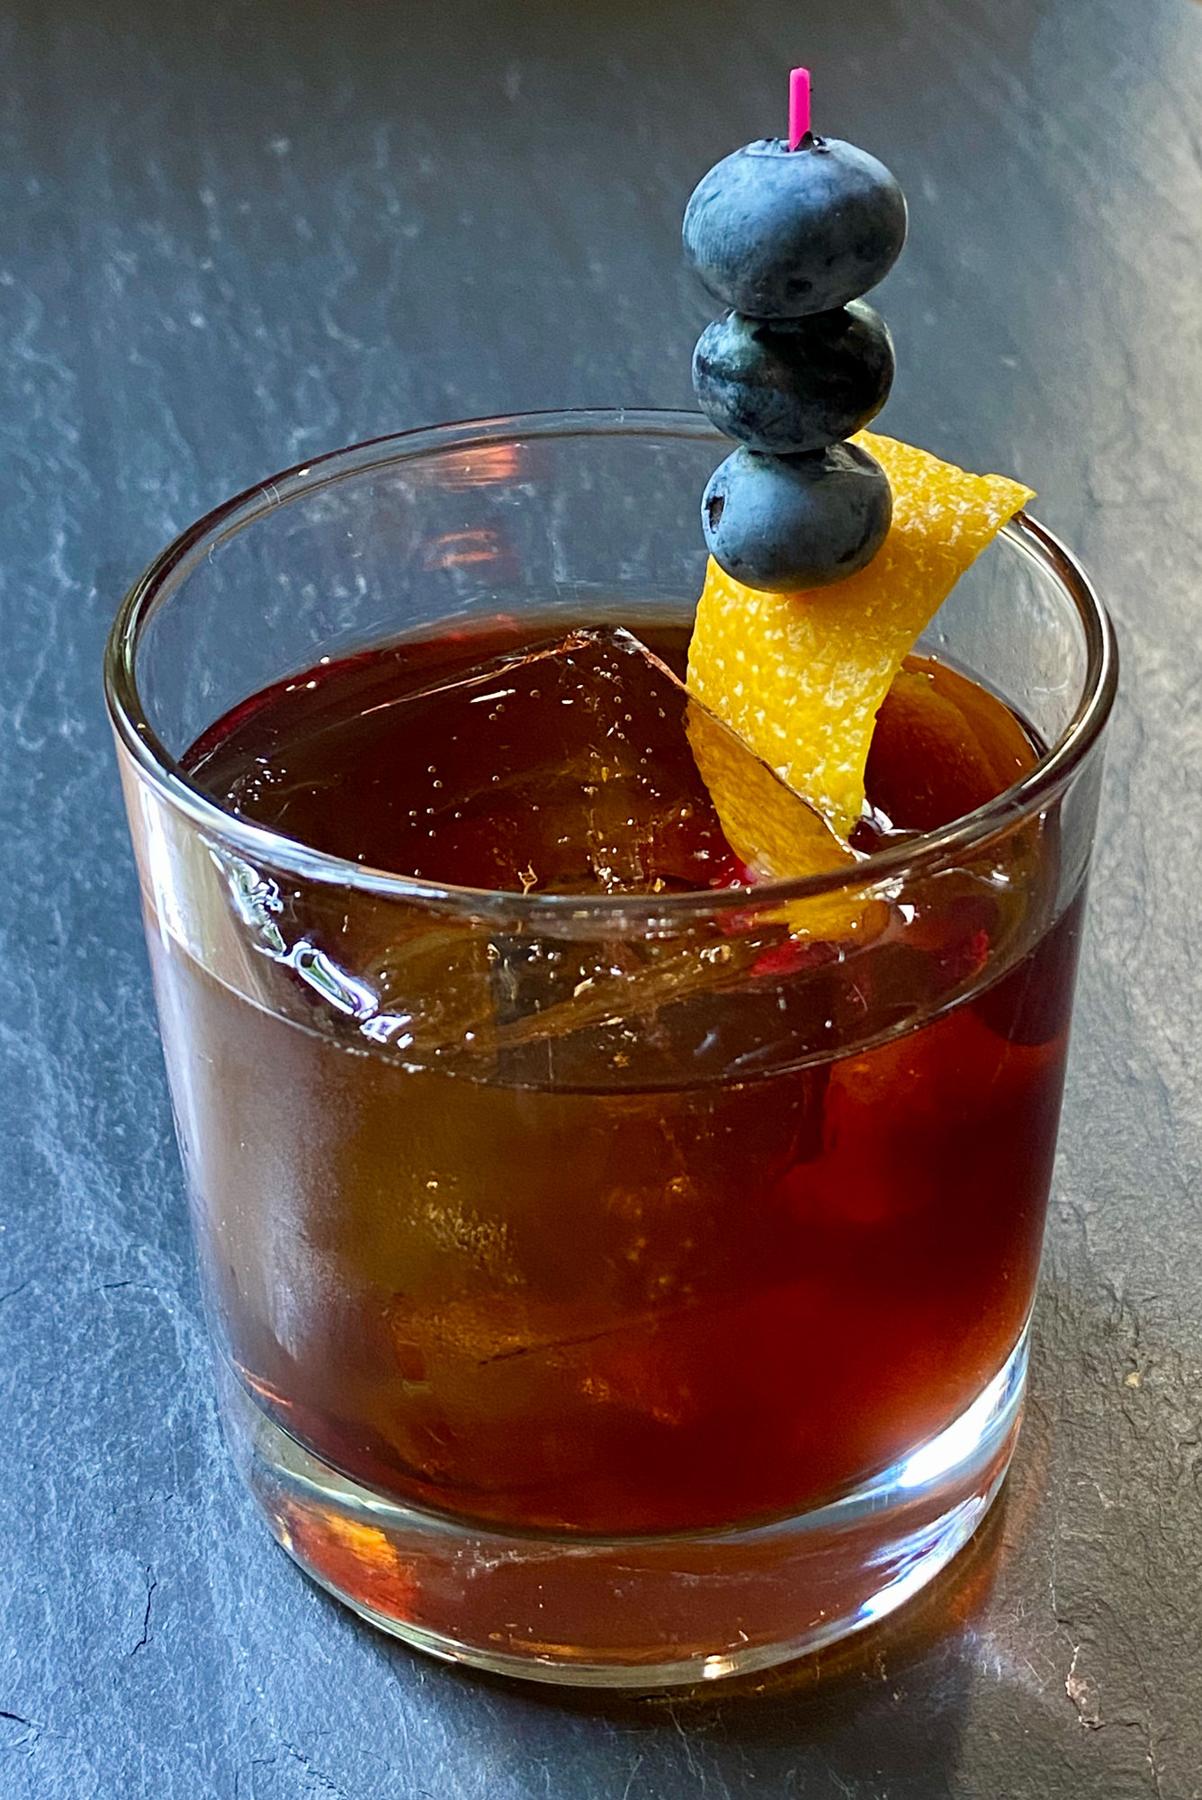 An example of the My One and Only Blue, the mixed drink (drink) featuring bourbon whiskey, Pasubio Vino Amaro, and orange twist; photo by Martin Doudoroff